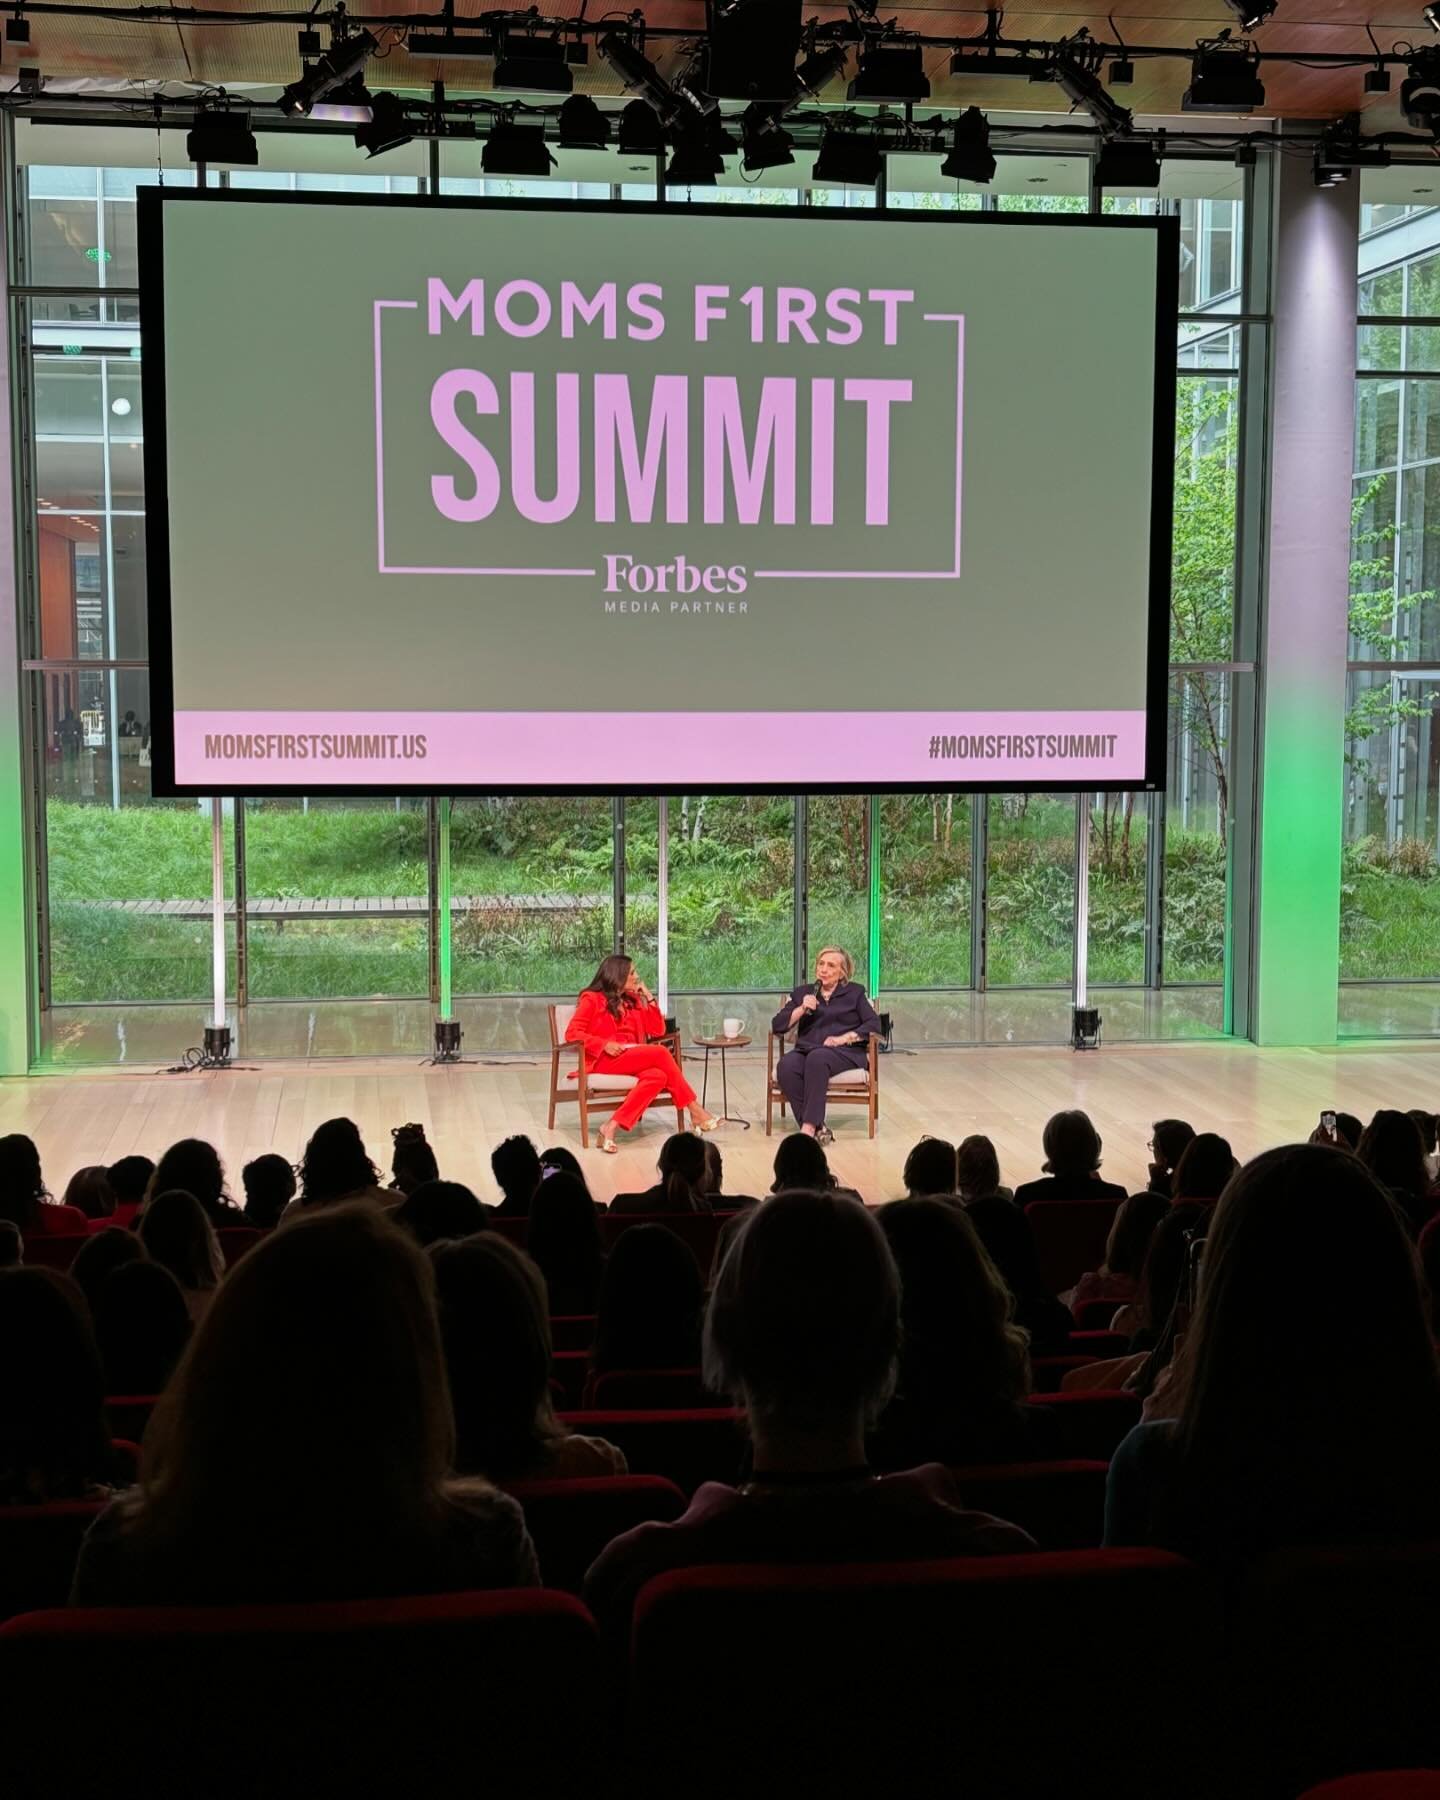 New York&rsquo;s First Lady @govkathyhochul and @hillaryclinton speaking today at the #momsfirstsummit with @forbeswomen @momsfirstus &mdash; too many good moments to share; one that stuck: &ldquo;I think motherhood has gotten harder because of the i